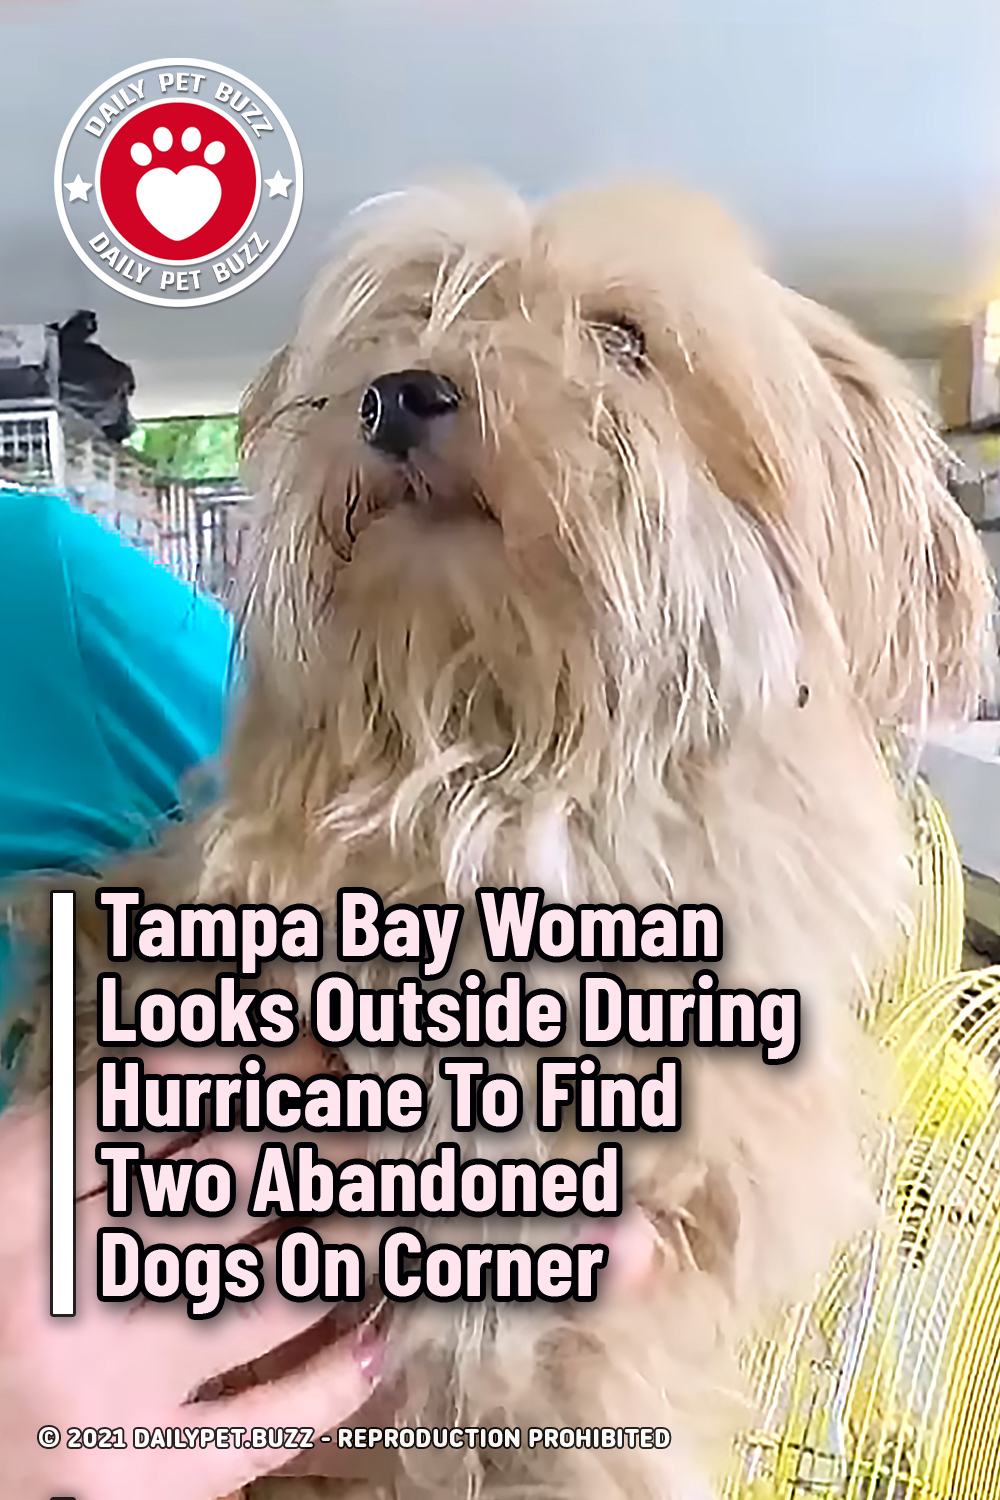 Tampa Bay Woman Looks Outside During Hurricane To Find Two Abandoned Dogs On Corner